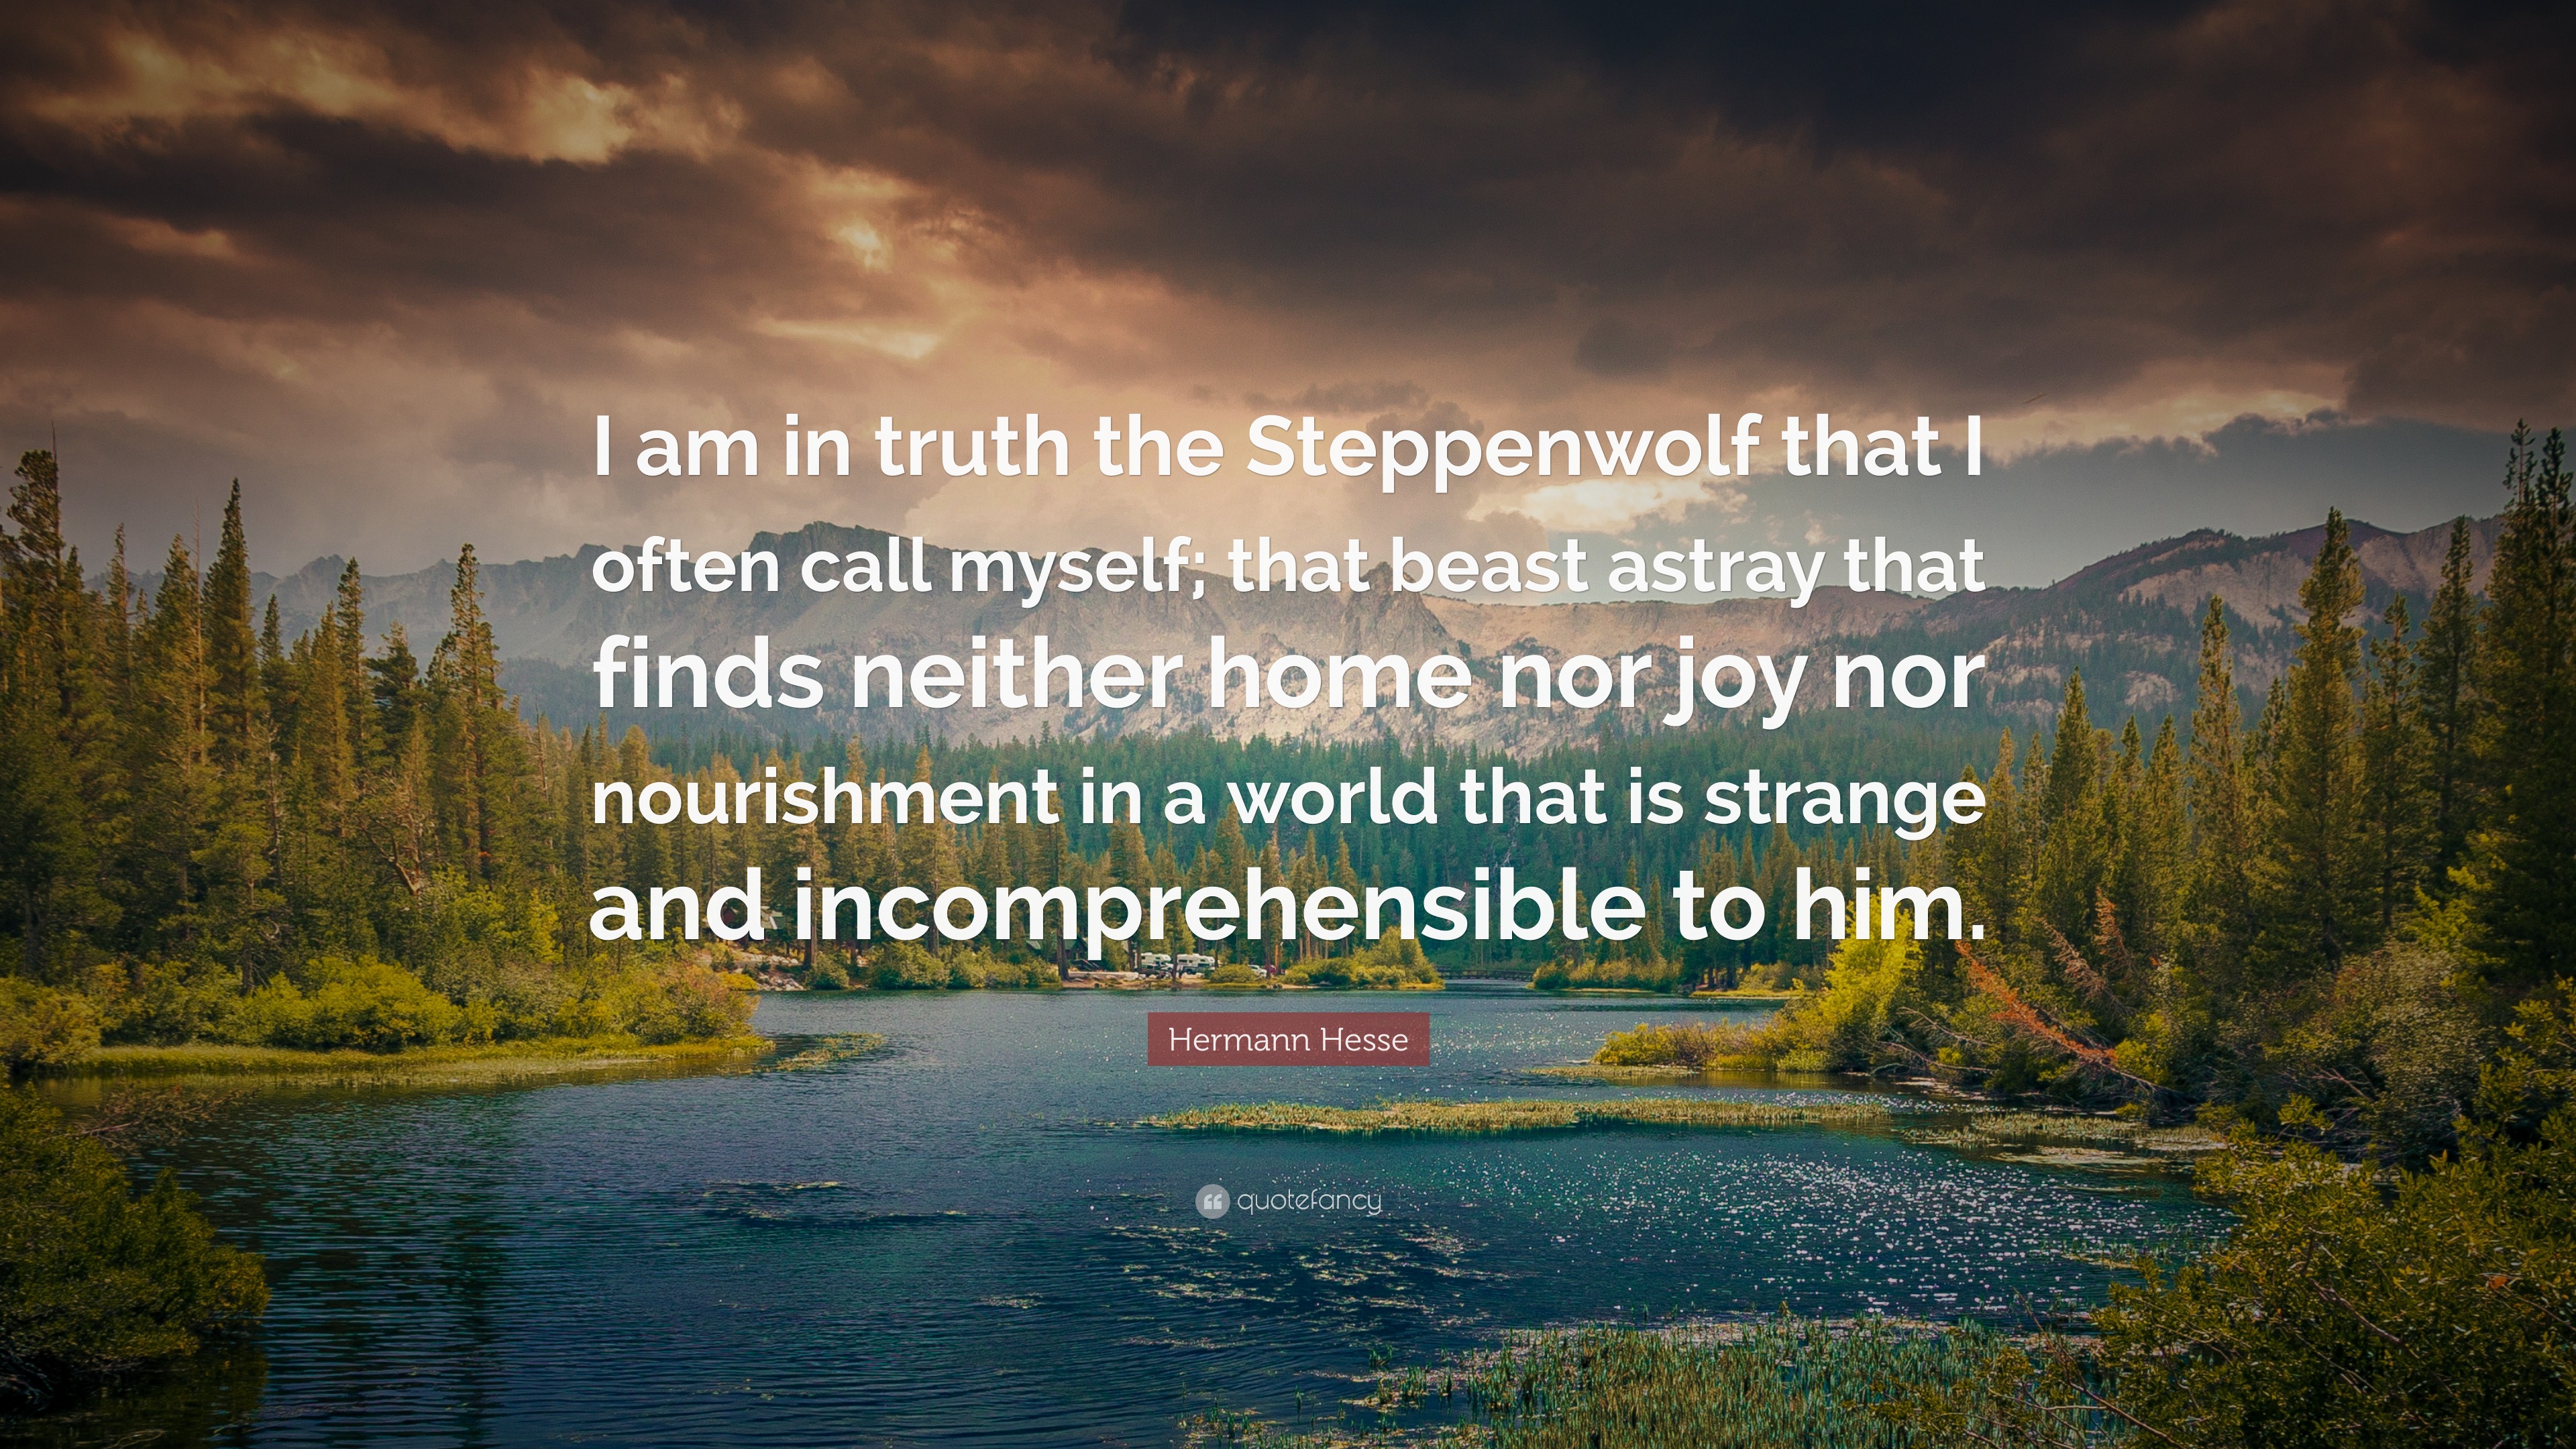 Hermann Hesse Quote: “I am in truth the Steppenwolf that I often call